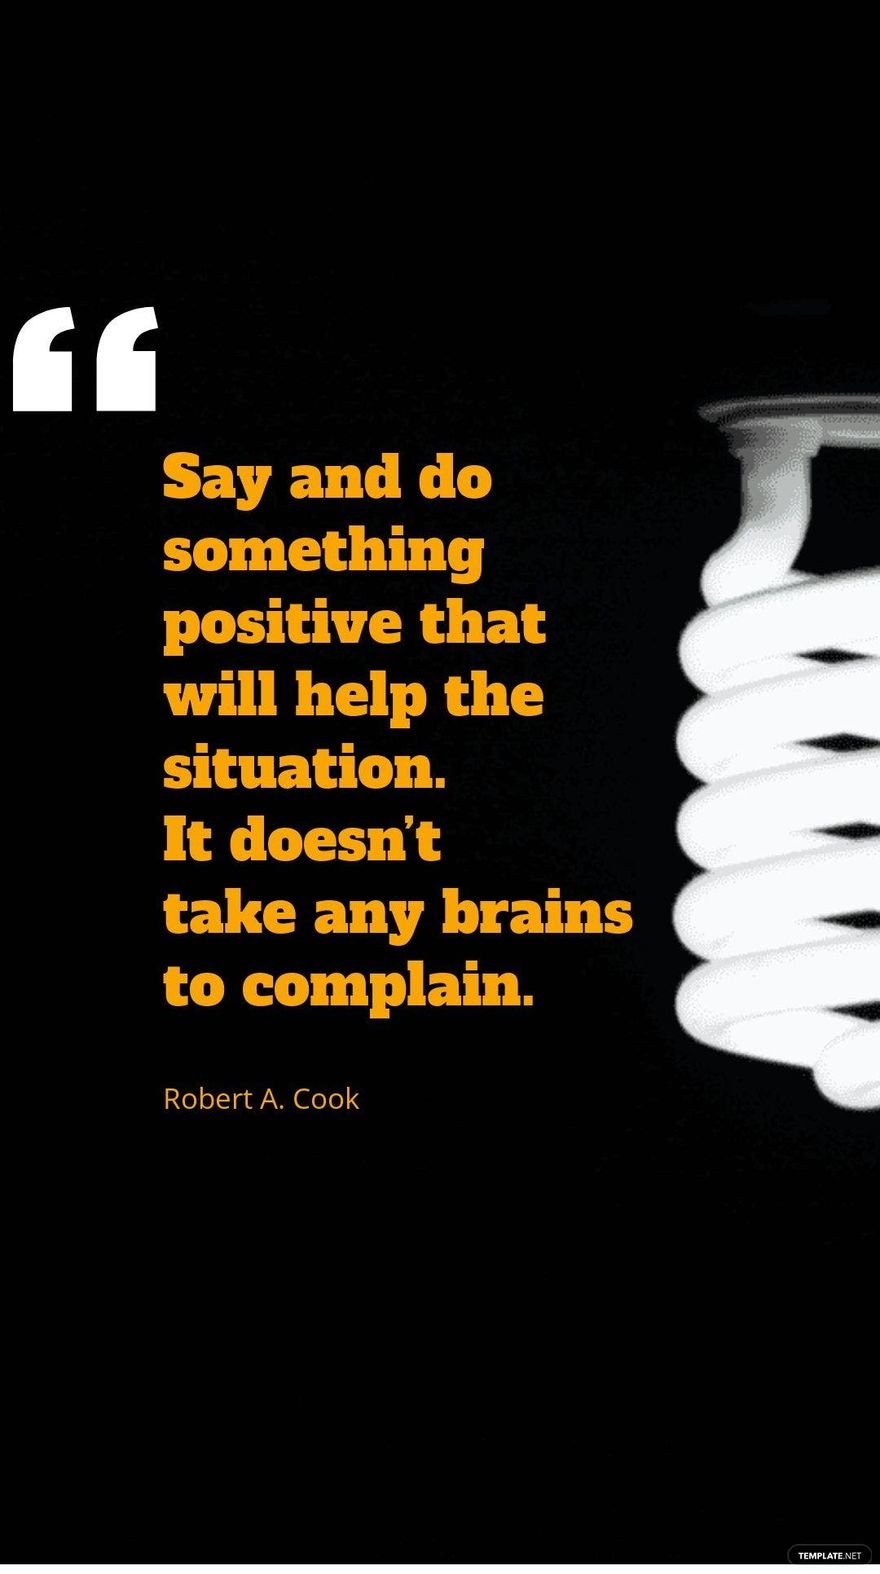 Robert A. Cook - Say and do something positive that will help the situation. It doesn’t take any brains to complain.